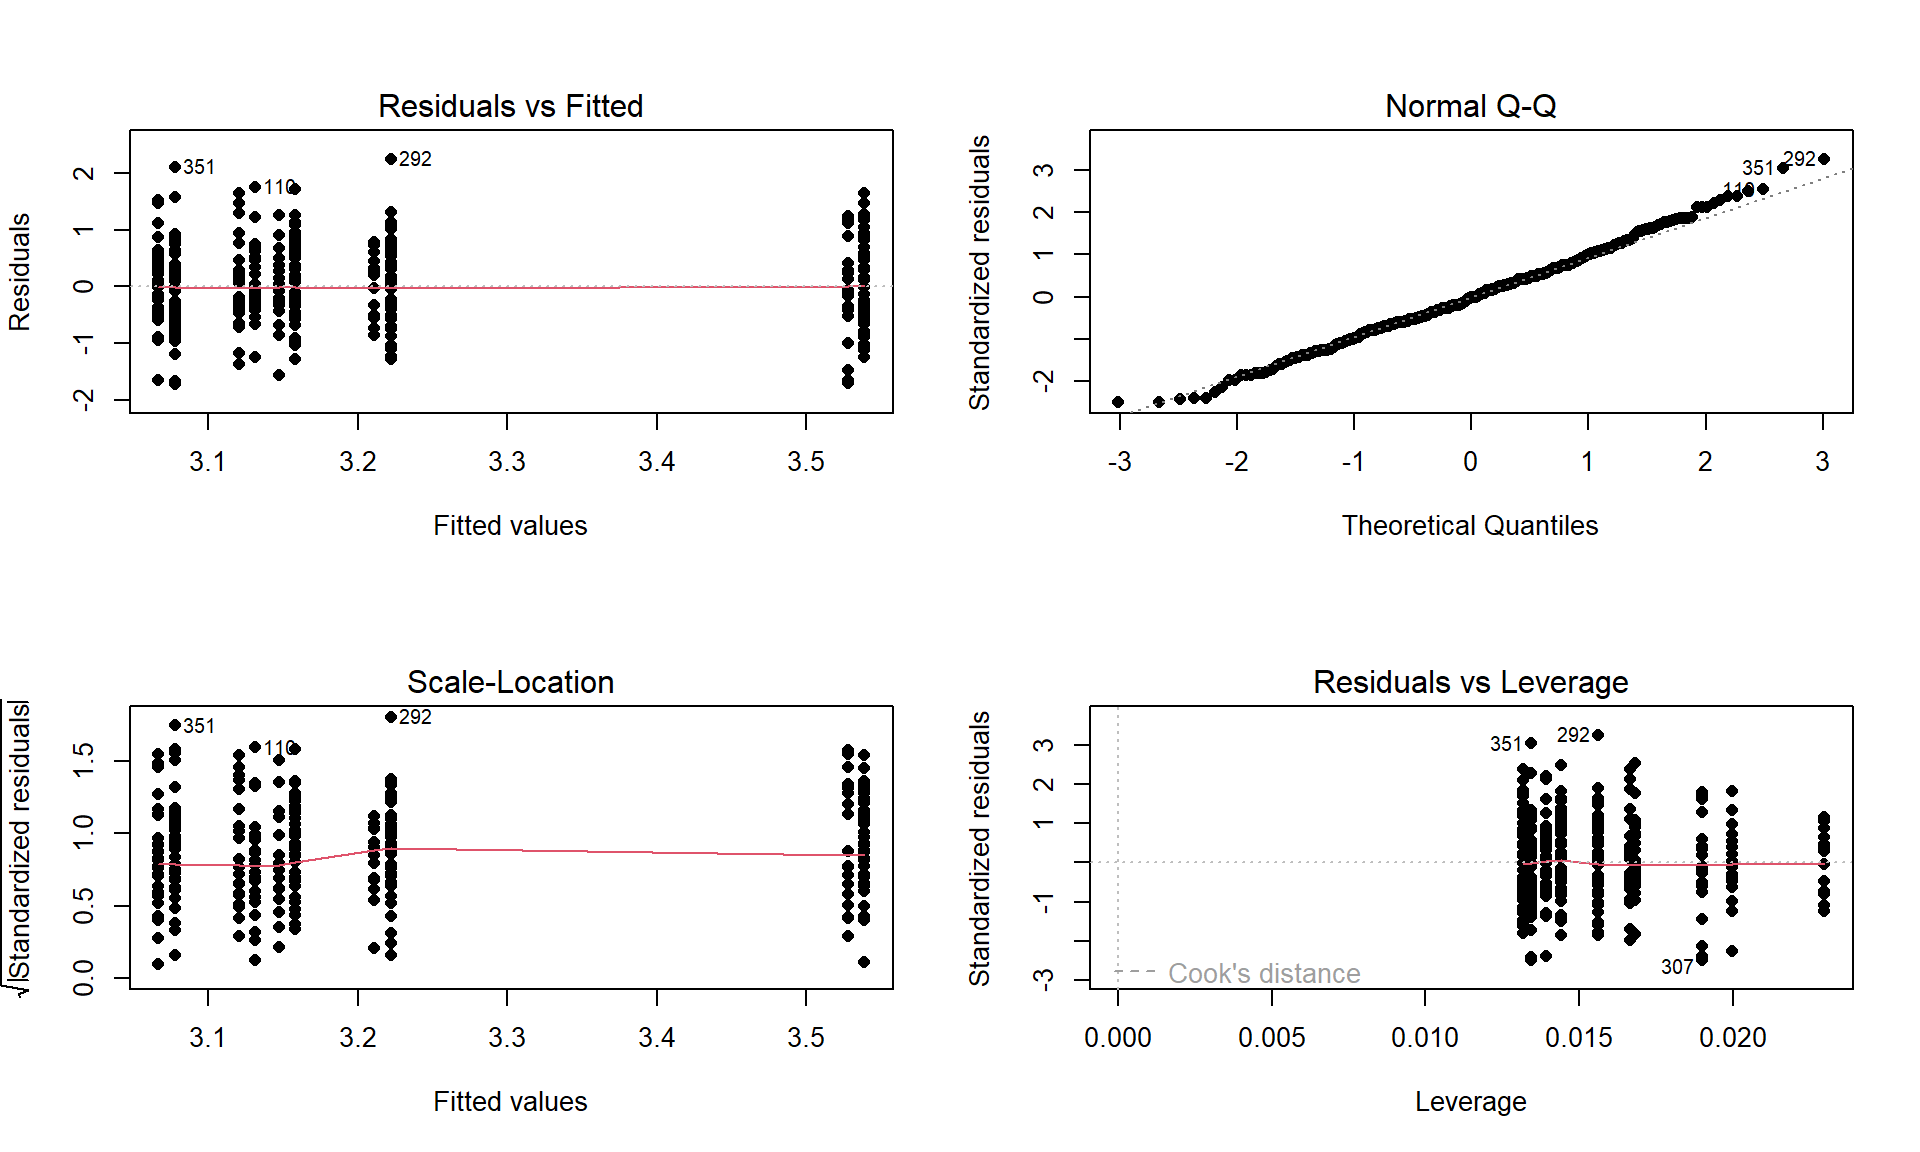 Diagnostic plot of additive model for ``prodebt`` by income group and whether they buy cigarettes/not.